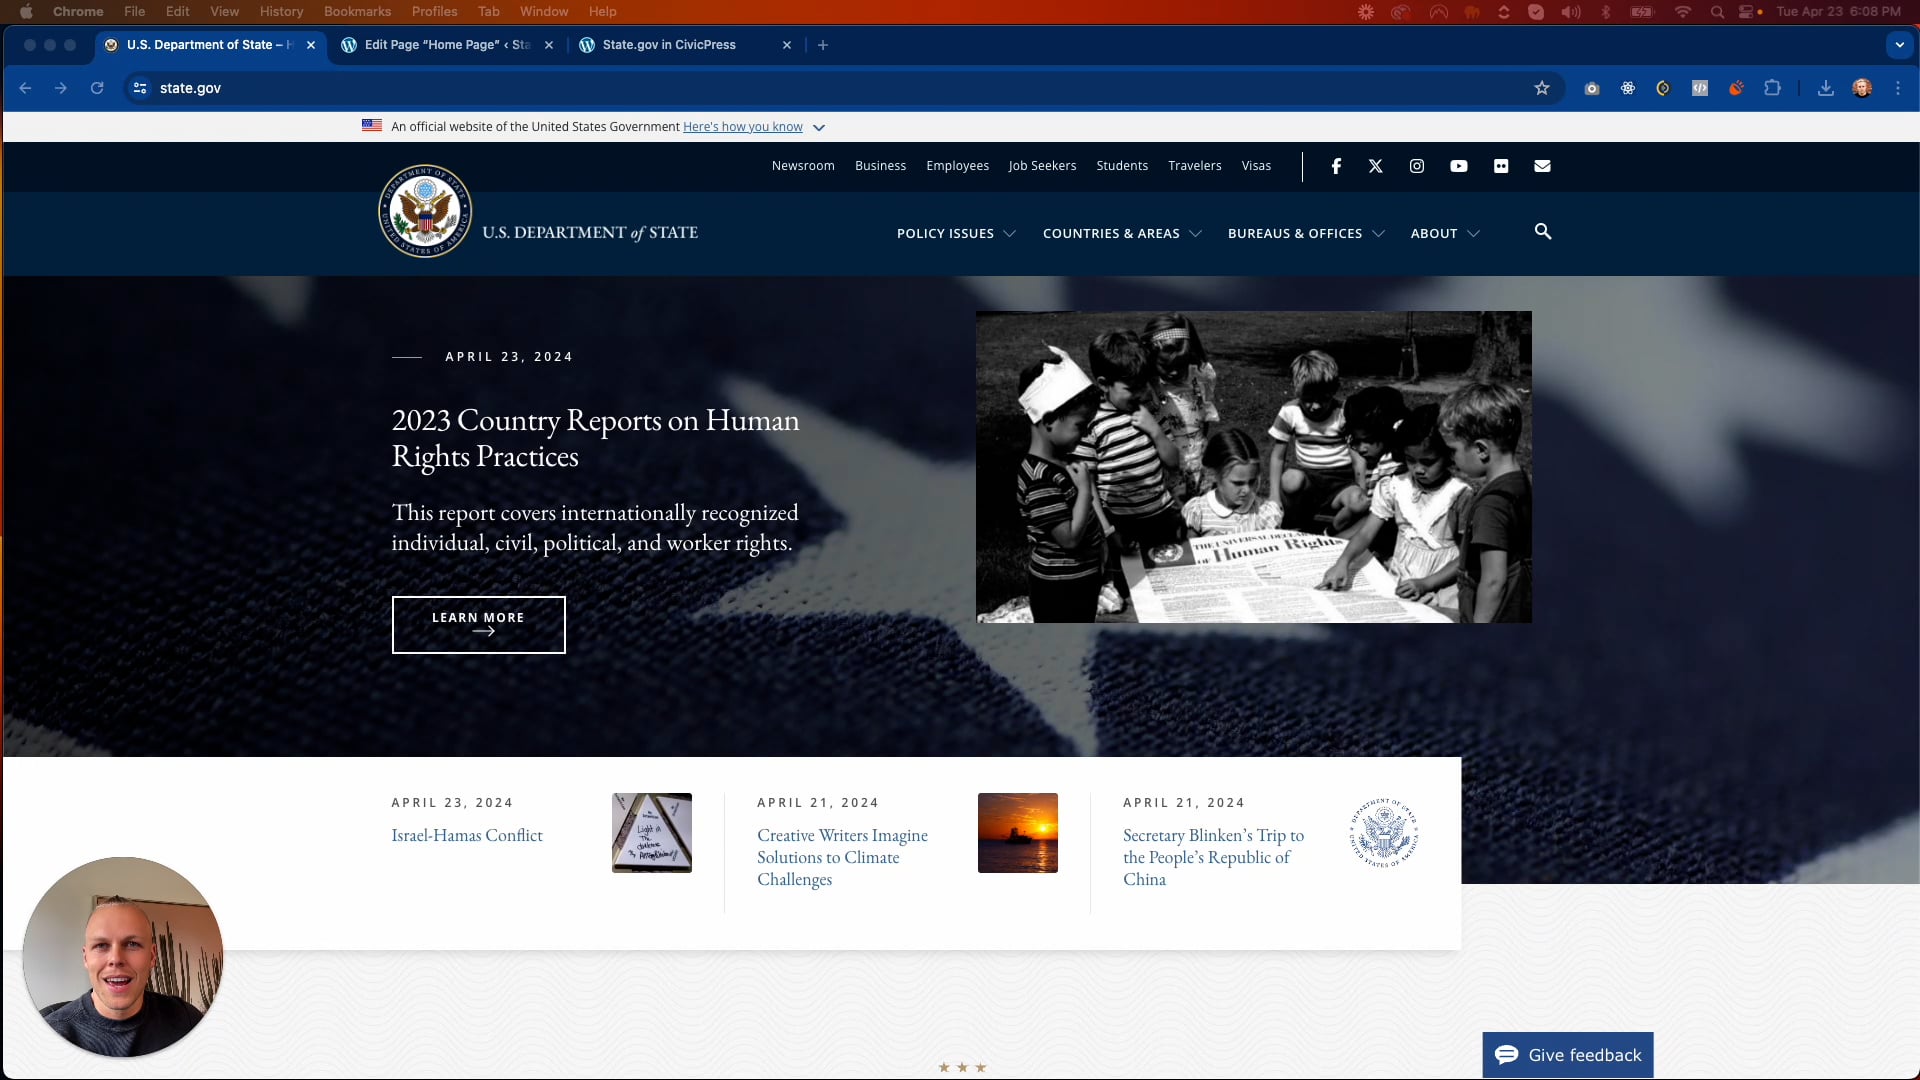 Building the state.gov homepage with CivicPress